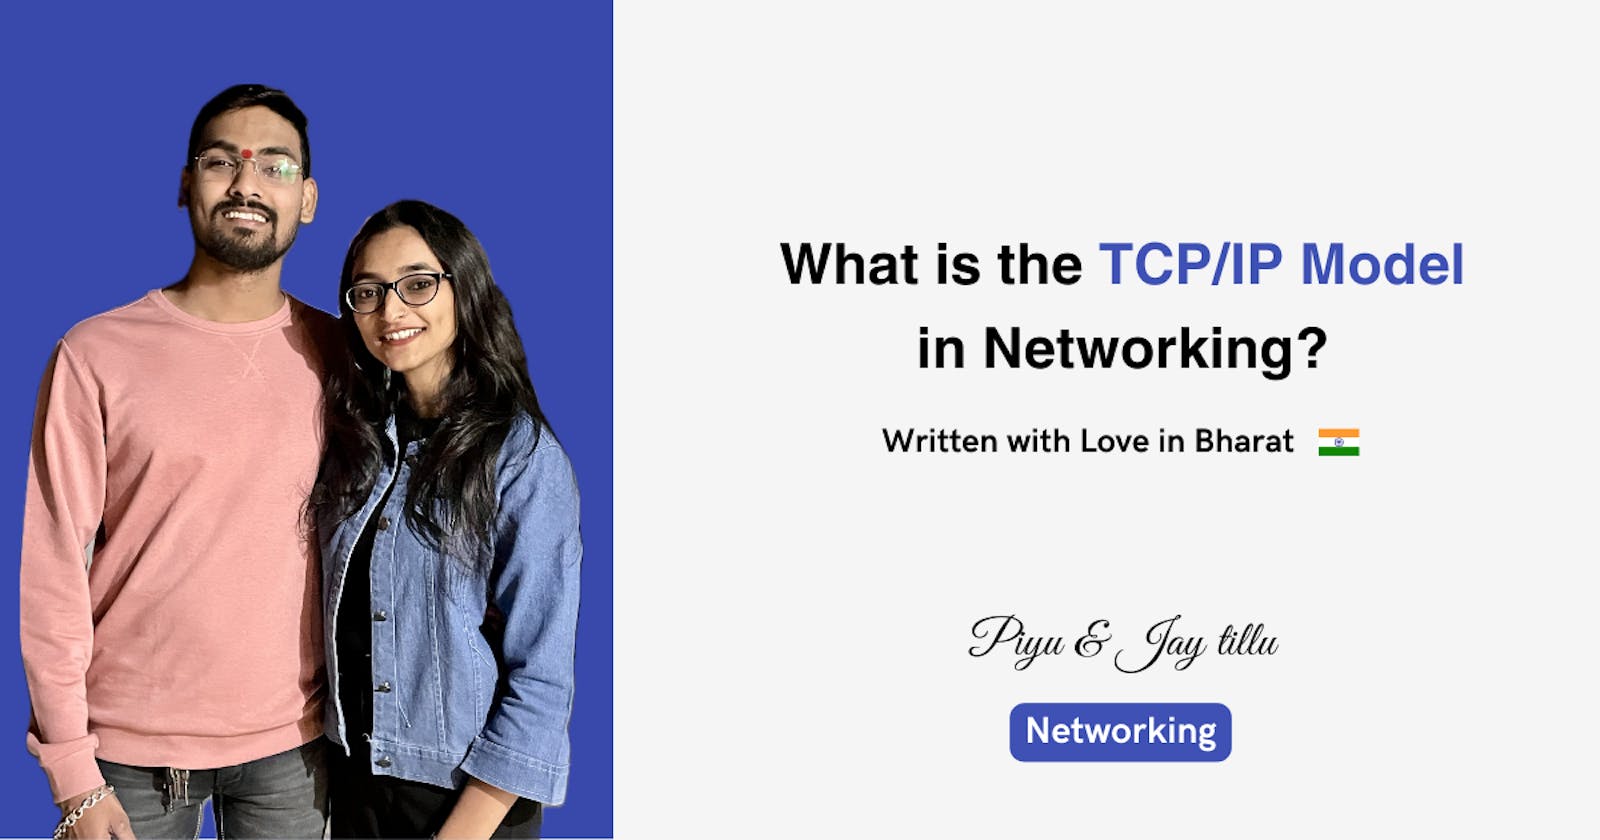 What is the TCP/IP Model?